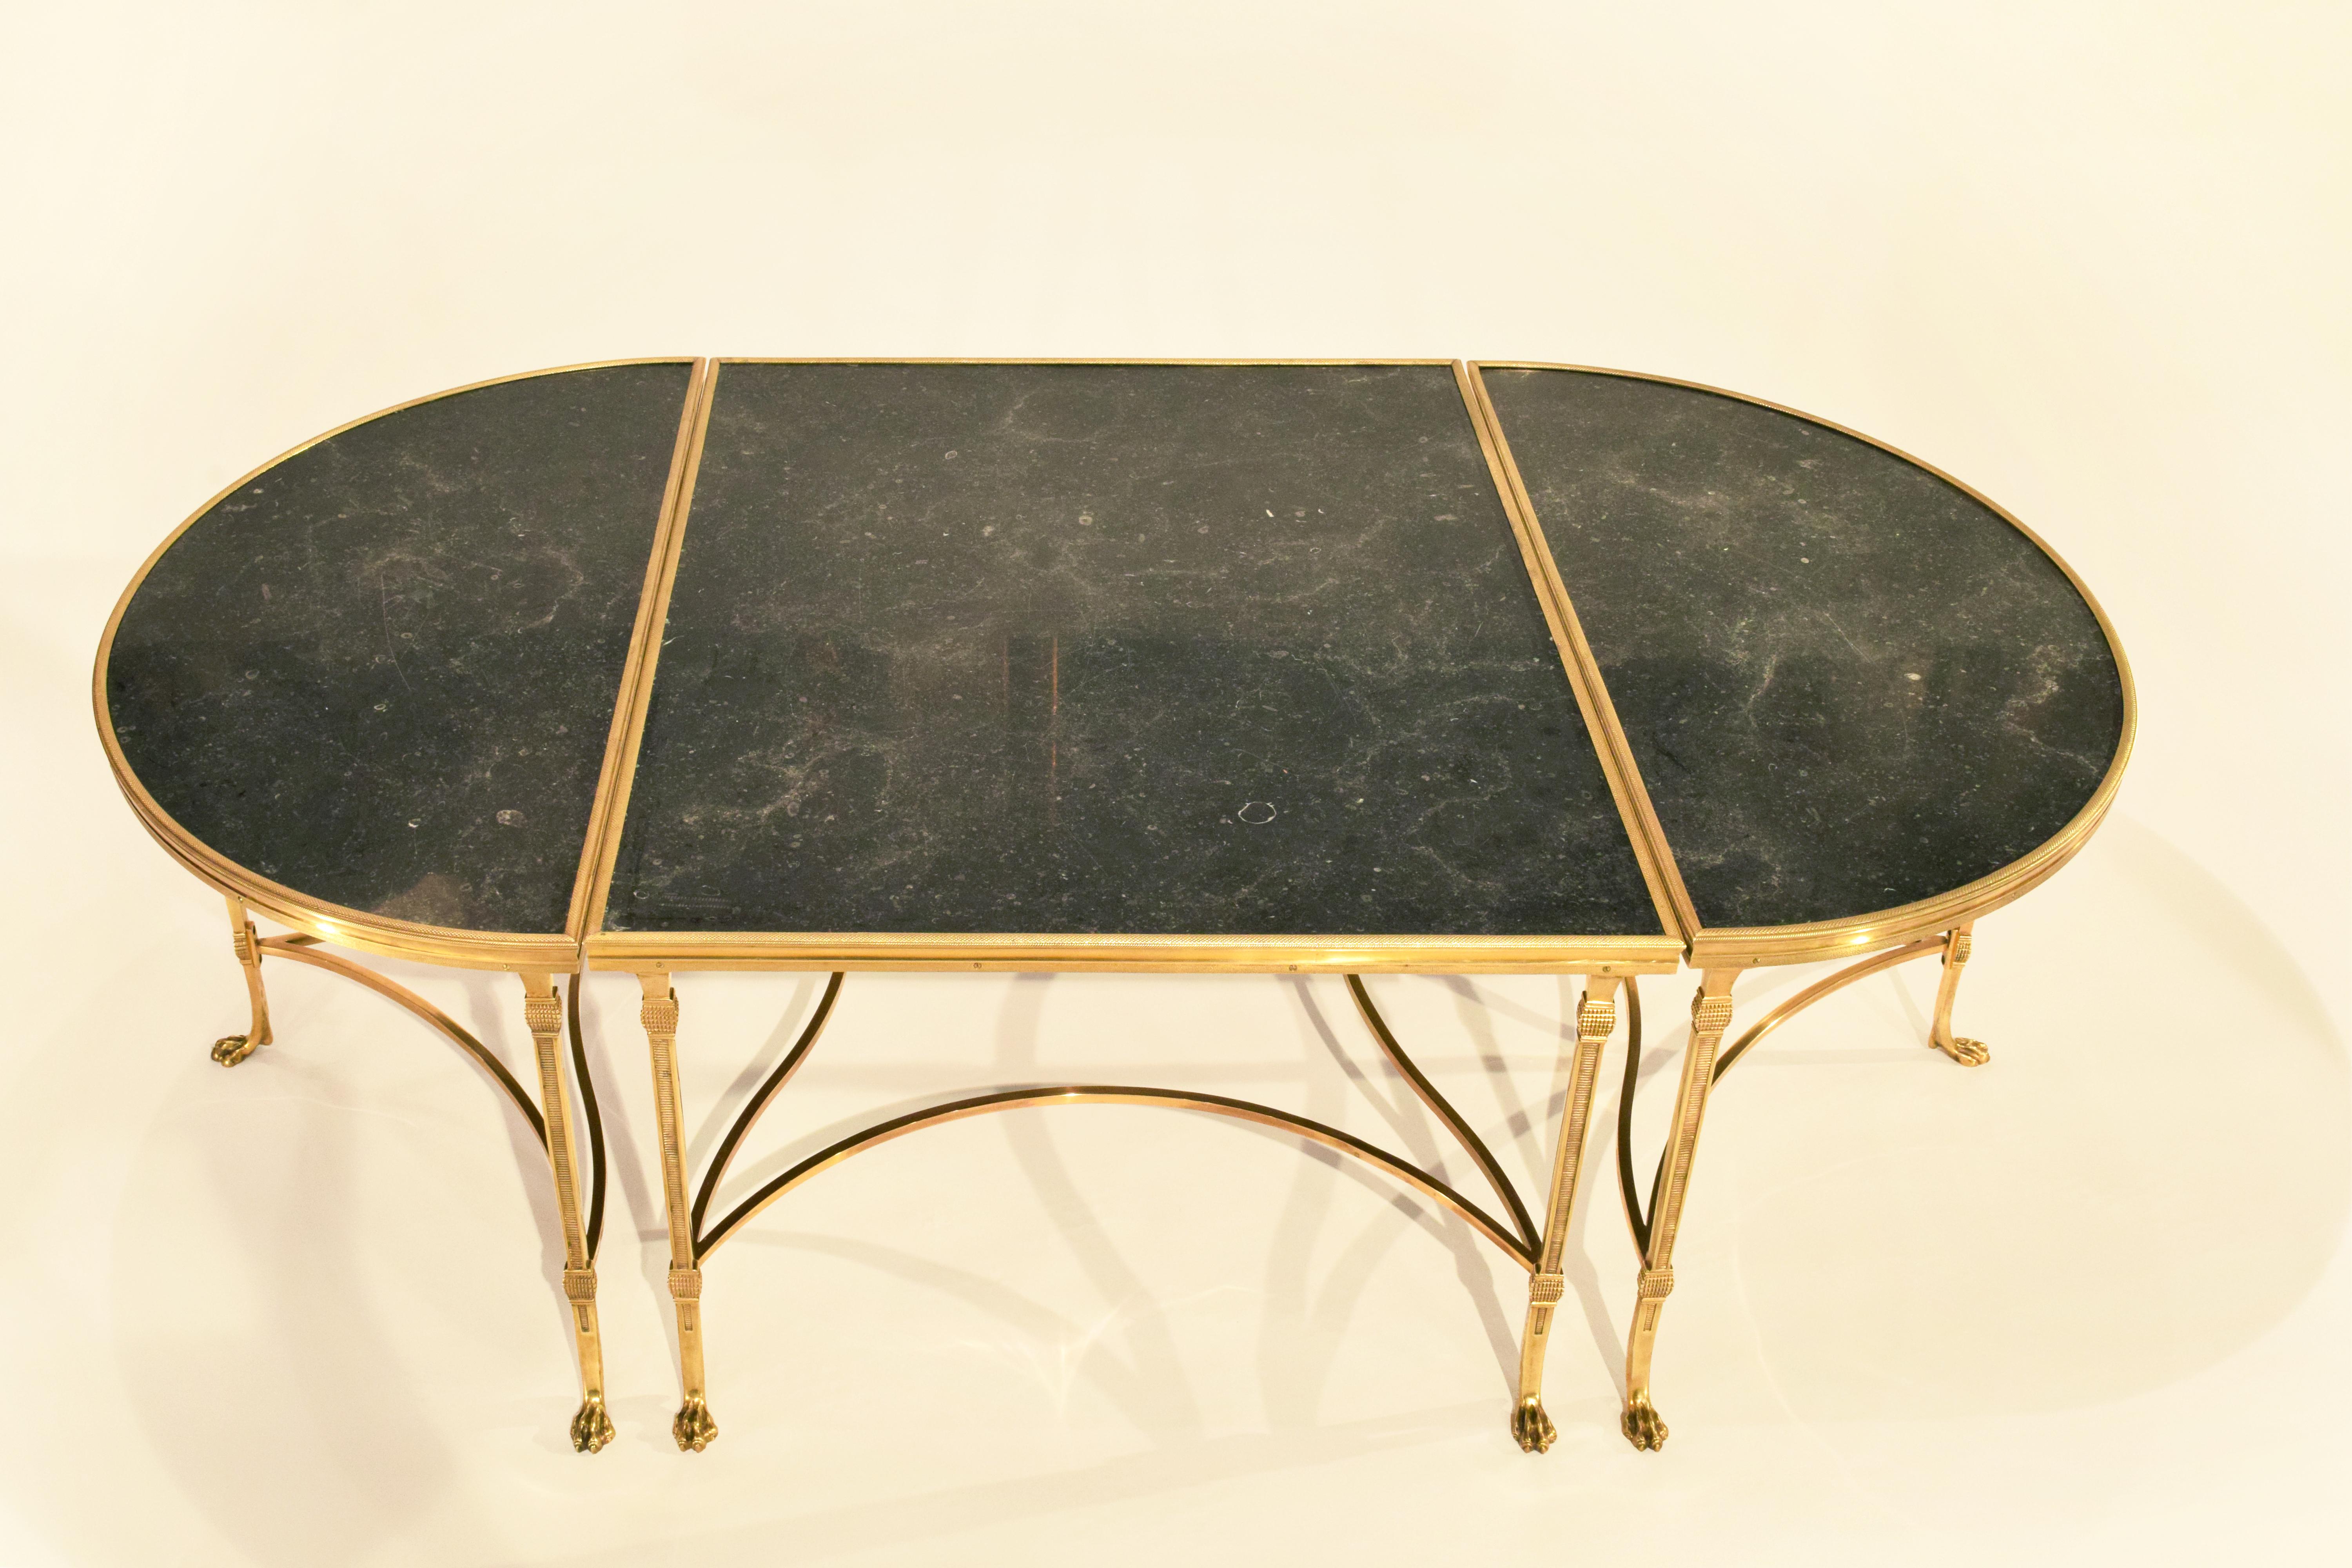 20th Century Maison Jansen Bronze and Marble Tripartite Cocktail Table